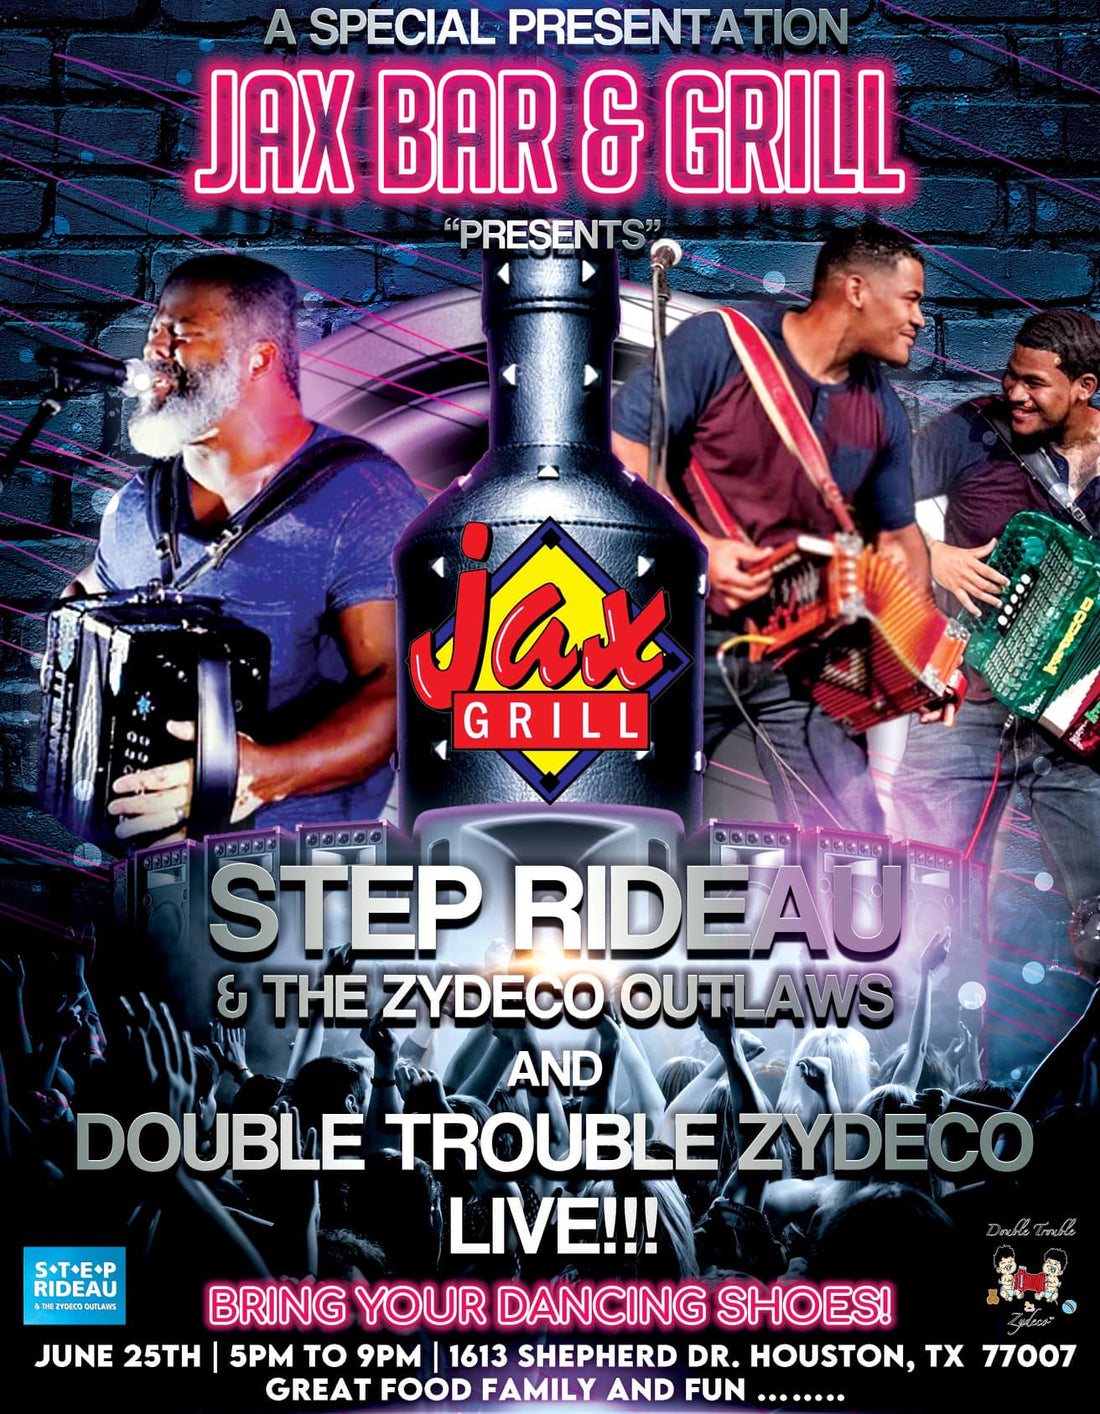 Join clients Double Trouble Zydeco along with Mr. Step Rideau & The Zydeco Outlaws